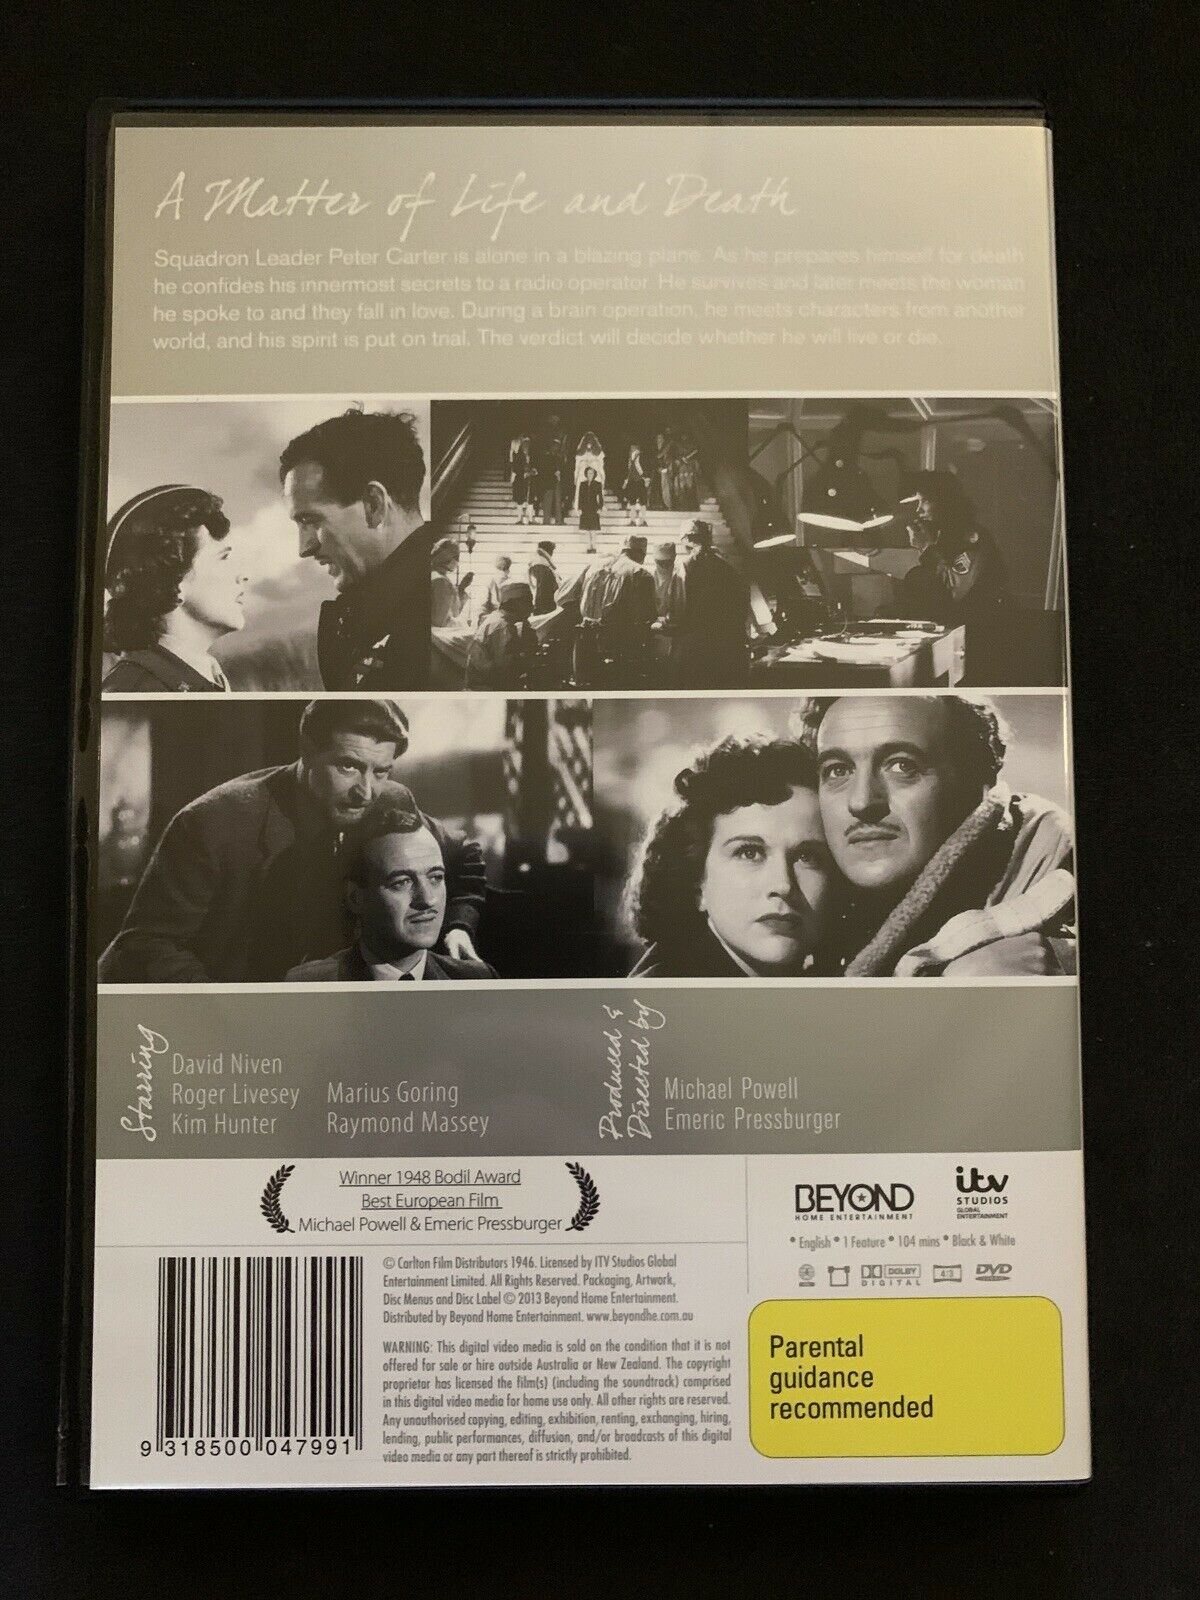 A Matter Of Life And Death (DVD, 1946) David Niven, Roger Livesey. Region 4